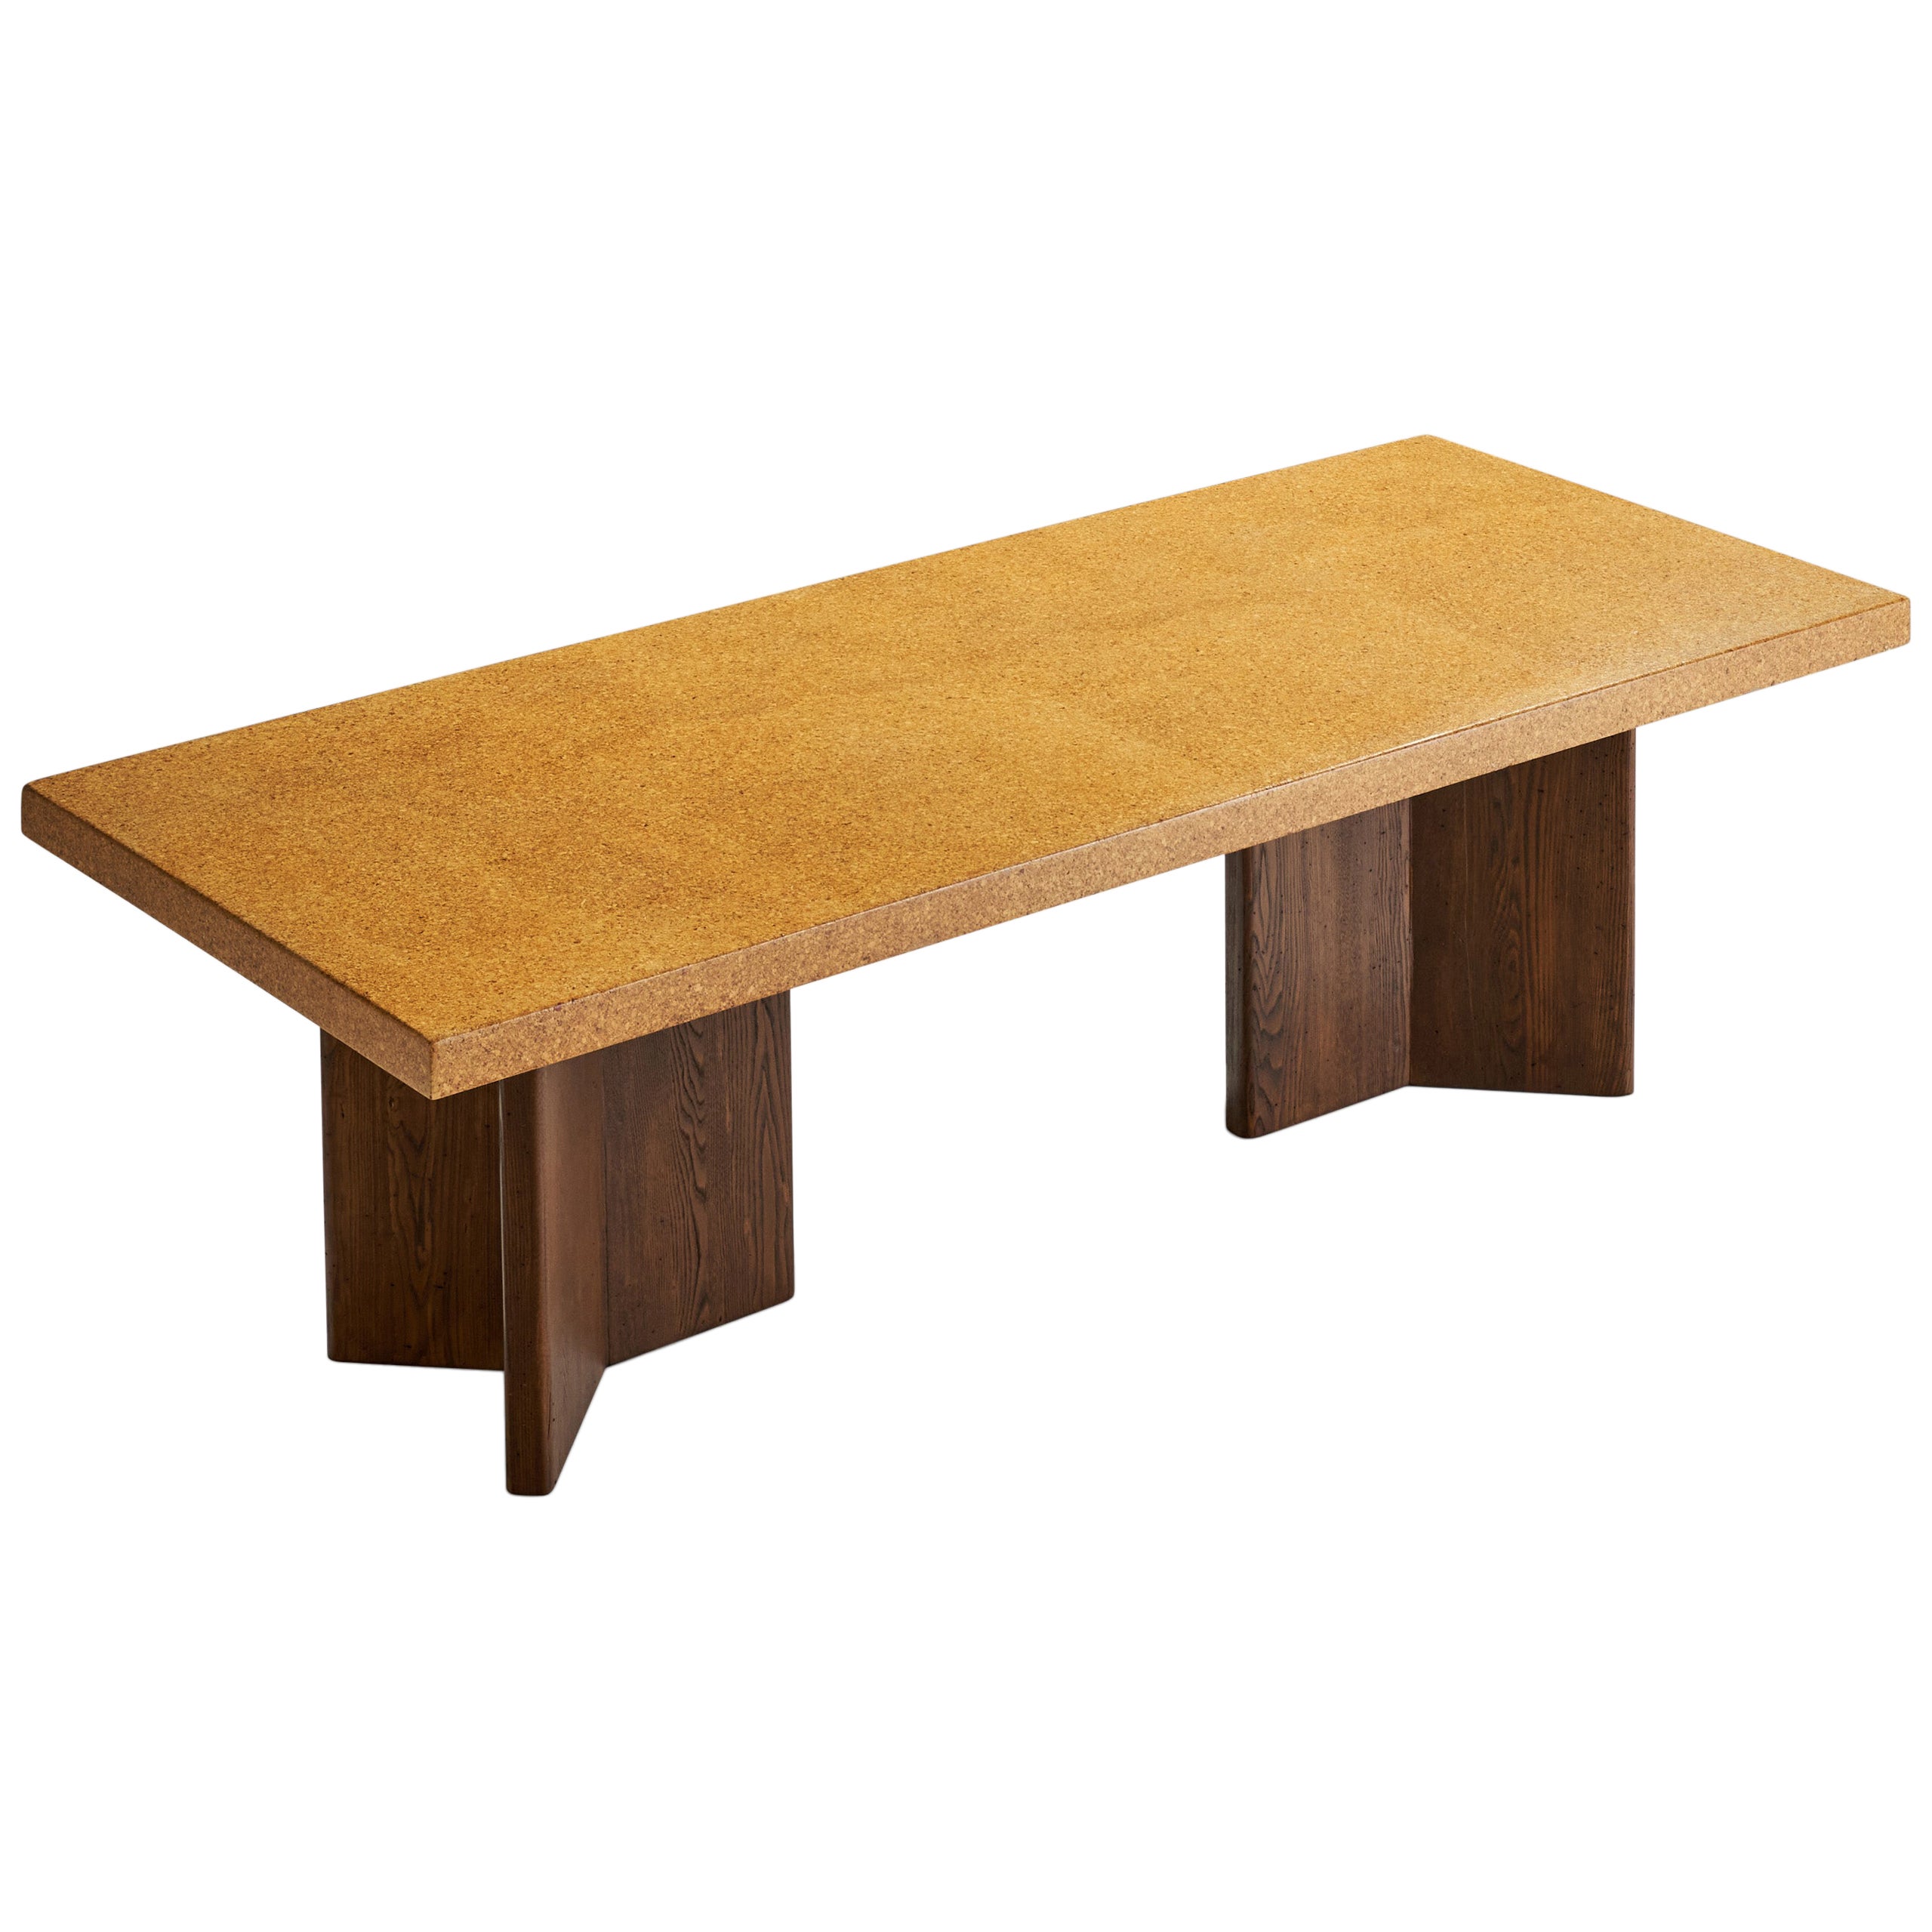  Johnson Furniture Company Dining Room Tables